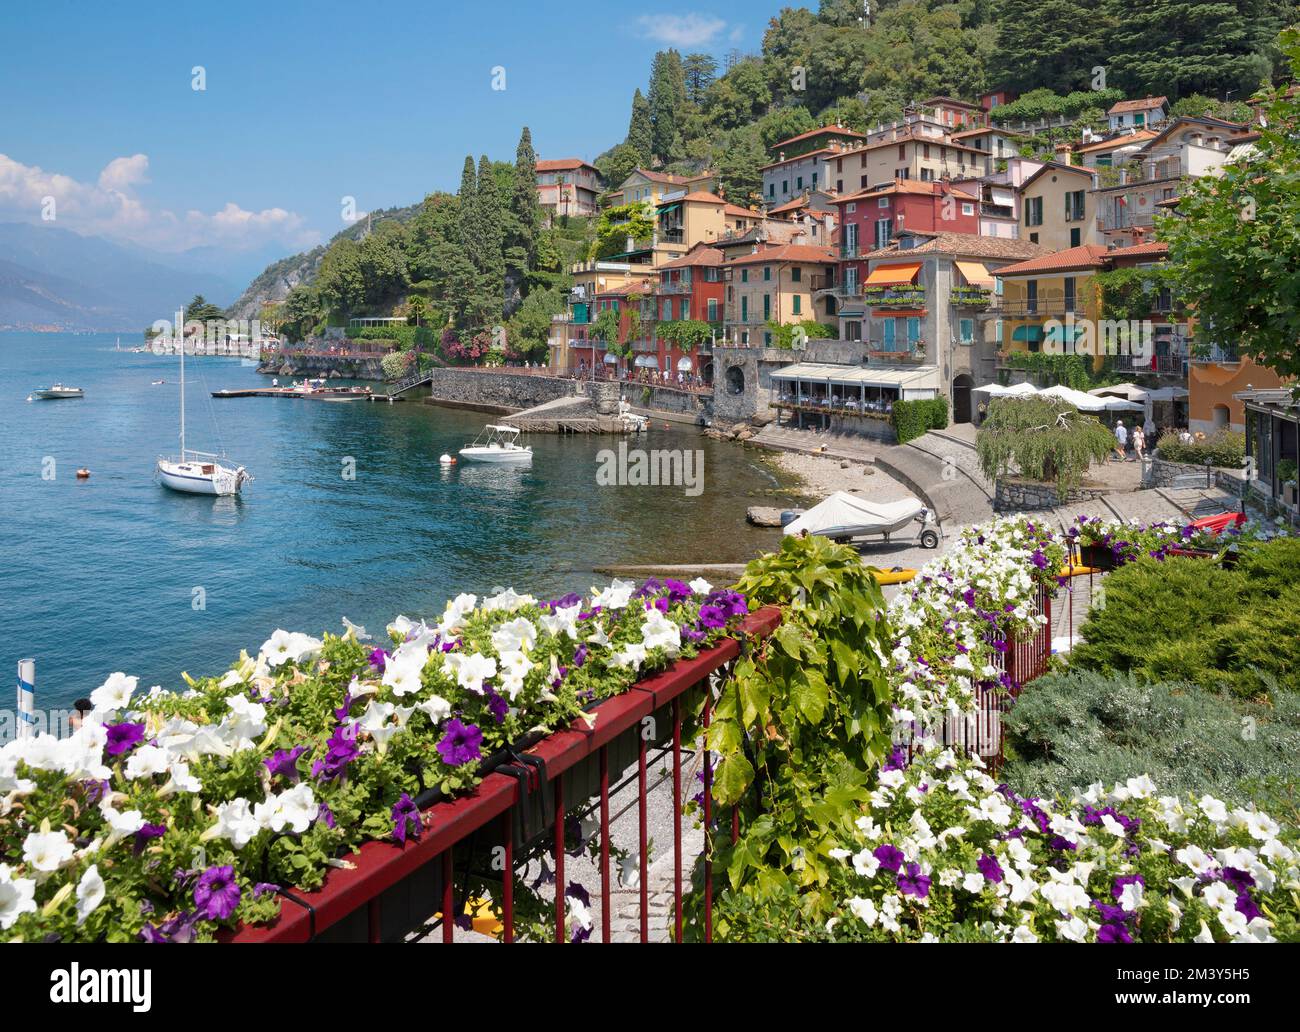 VARENNA, ITALY - JULY 20, 2022: The beach, town and he como lake. Stock Photo